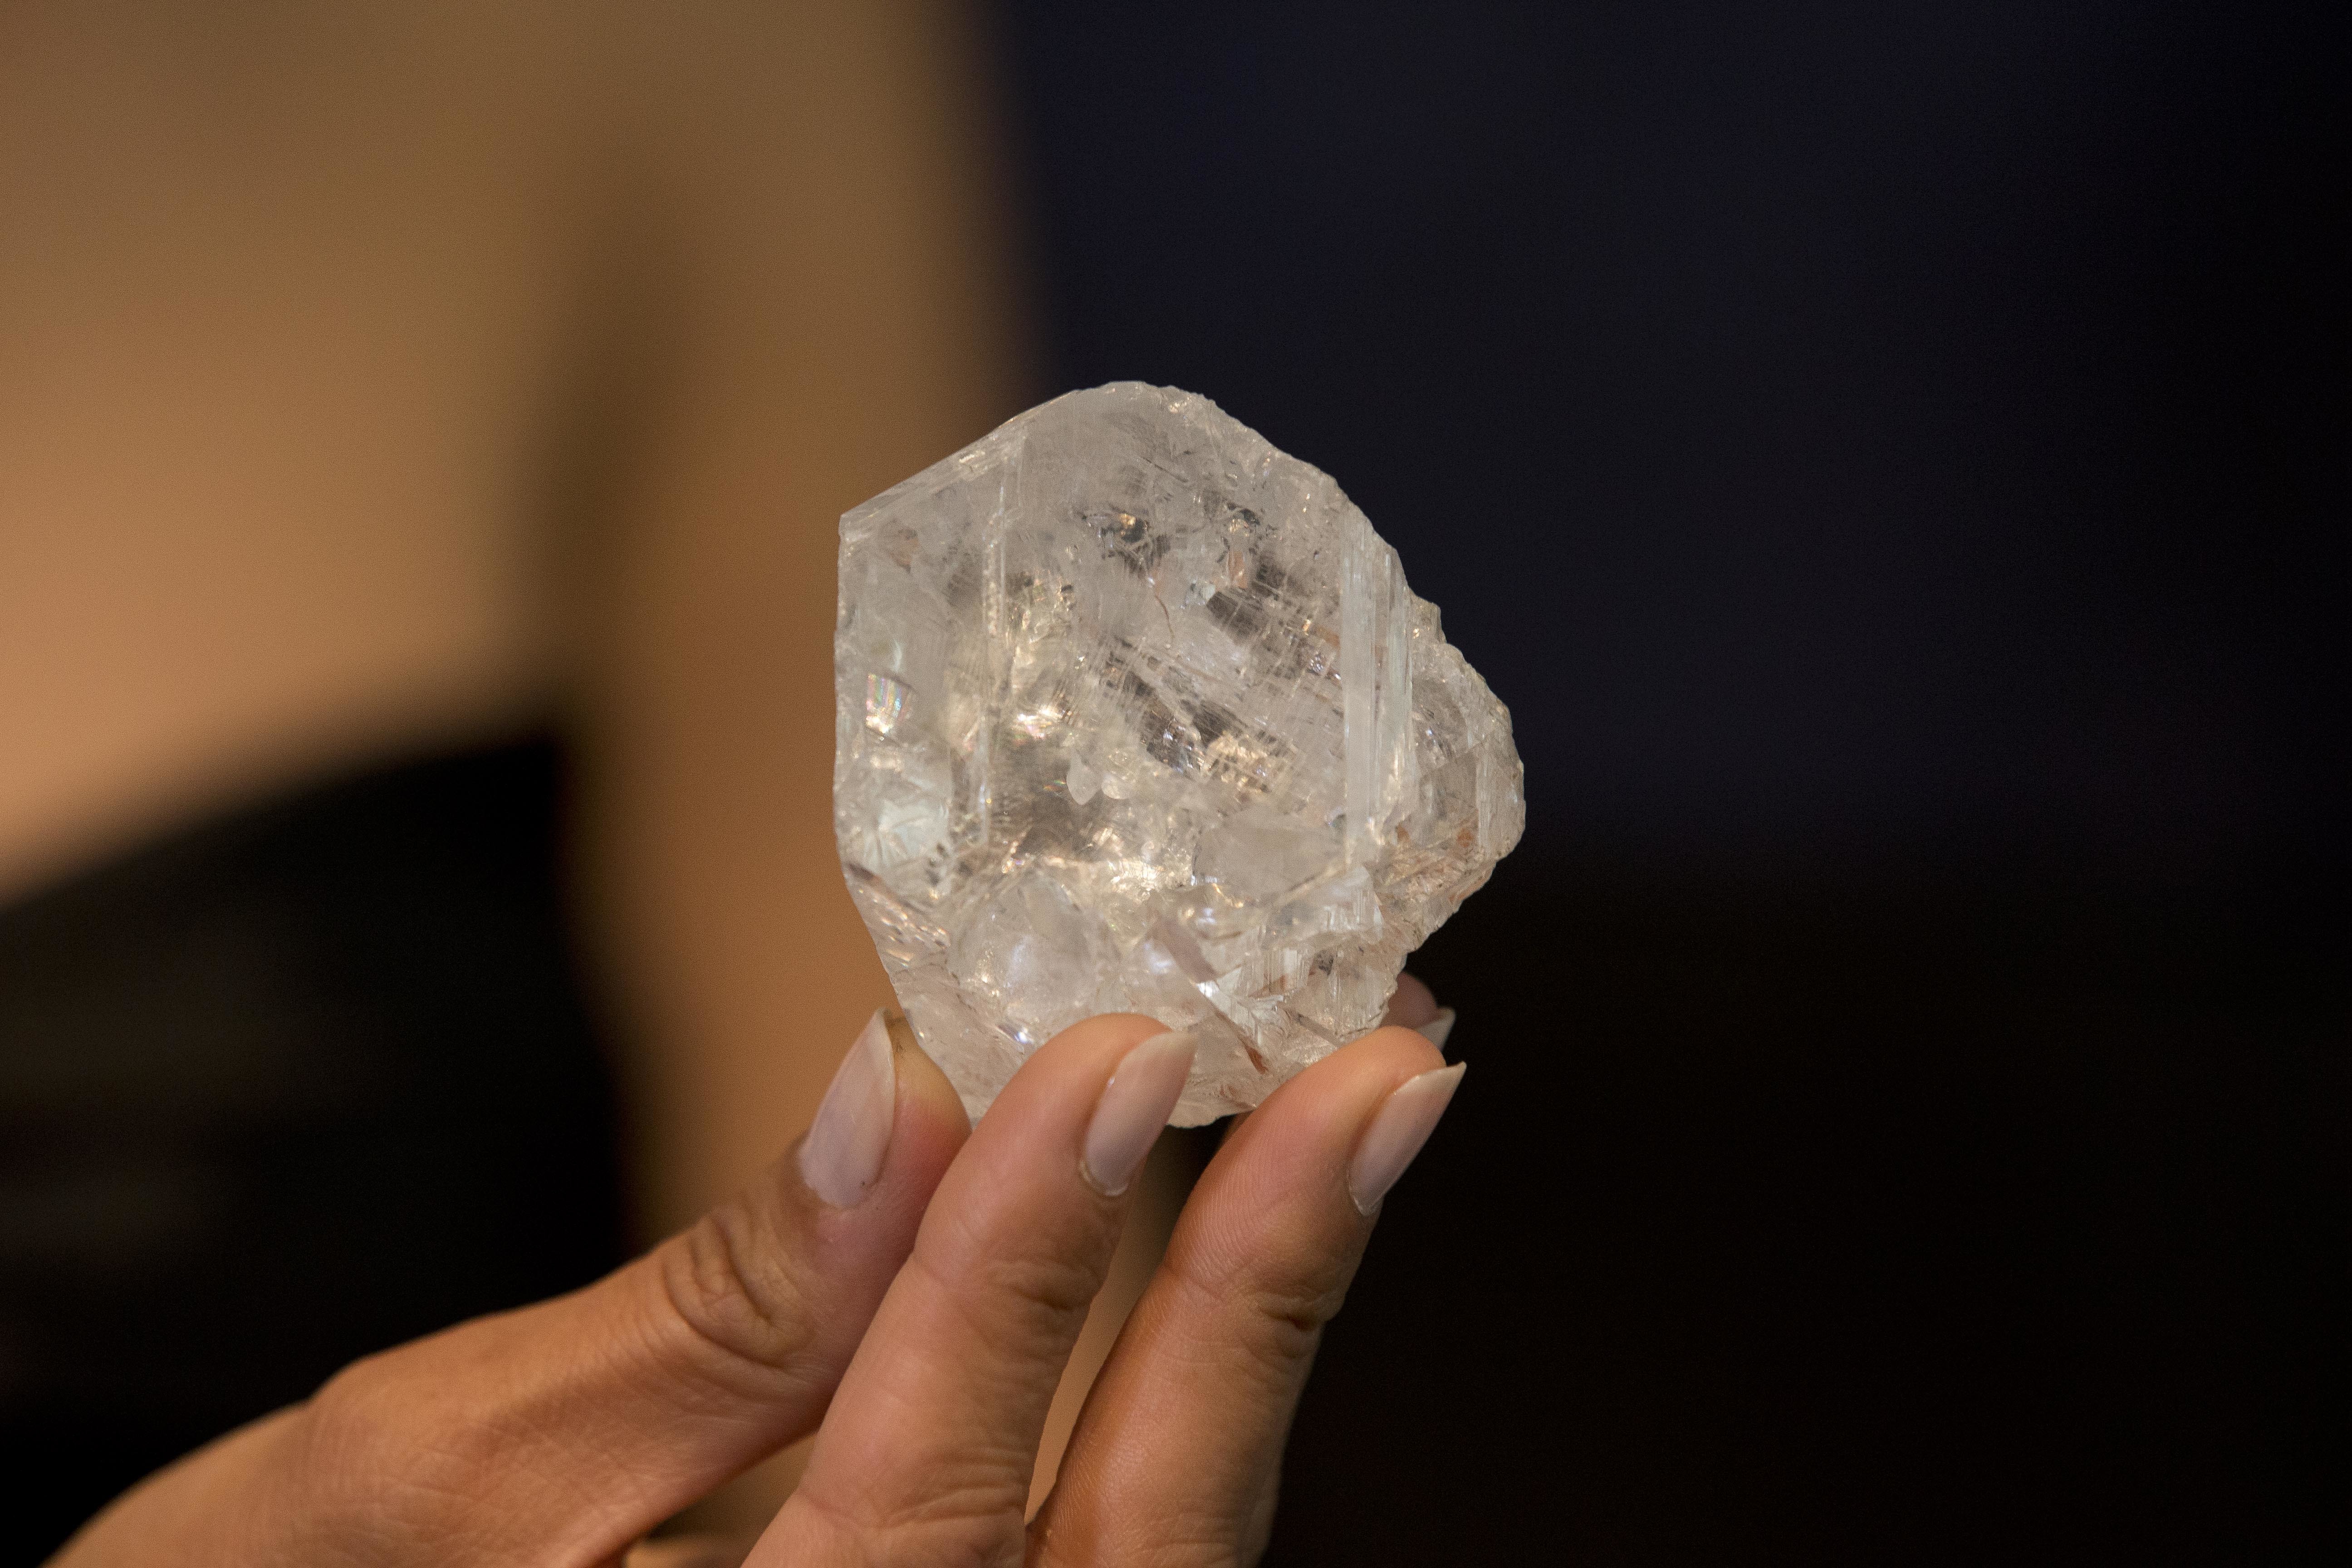 Giant, 1,109-carat diamond finds no buyer at auction